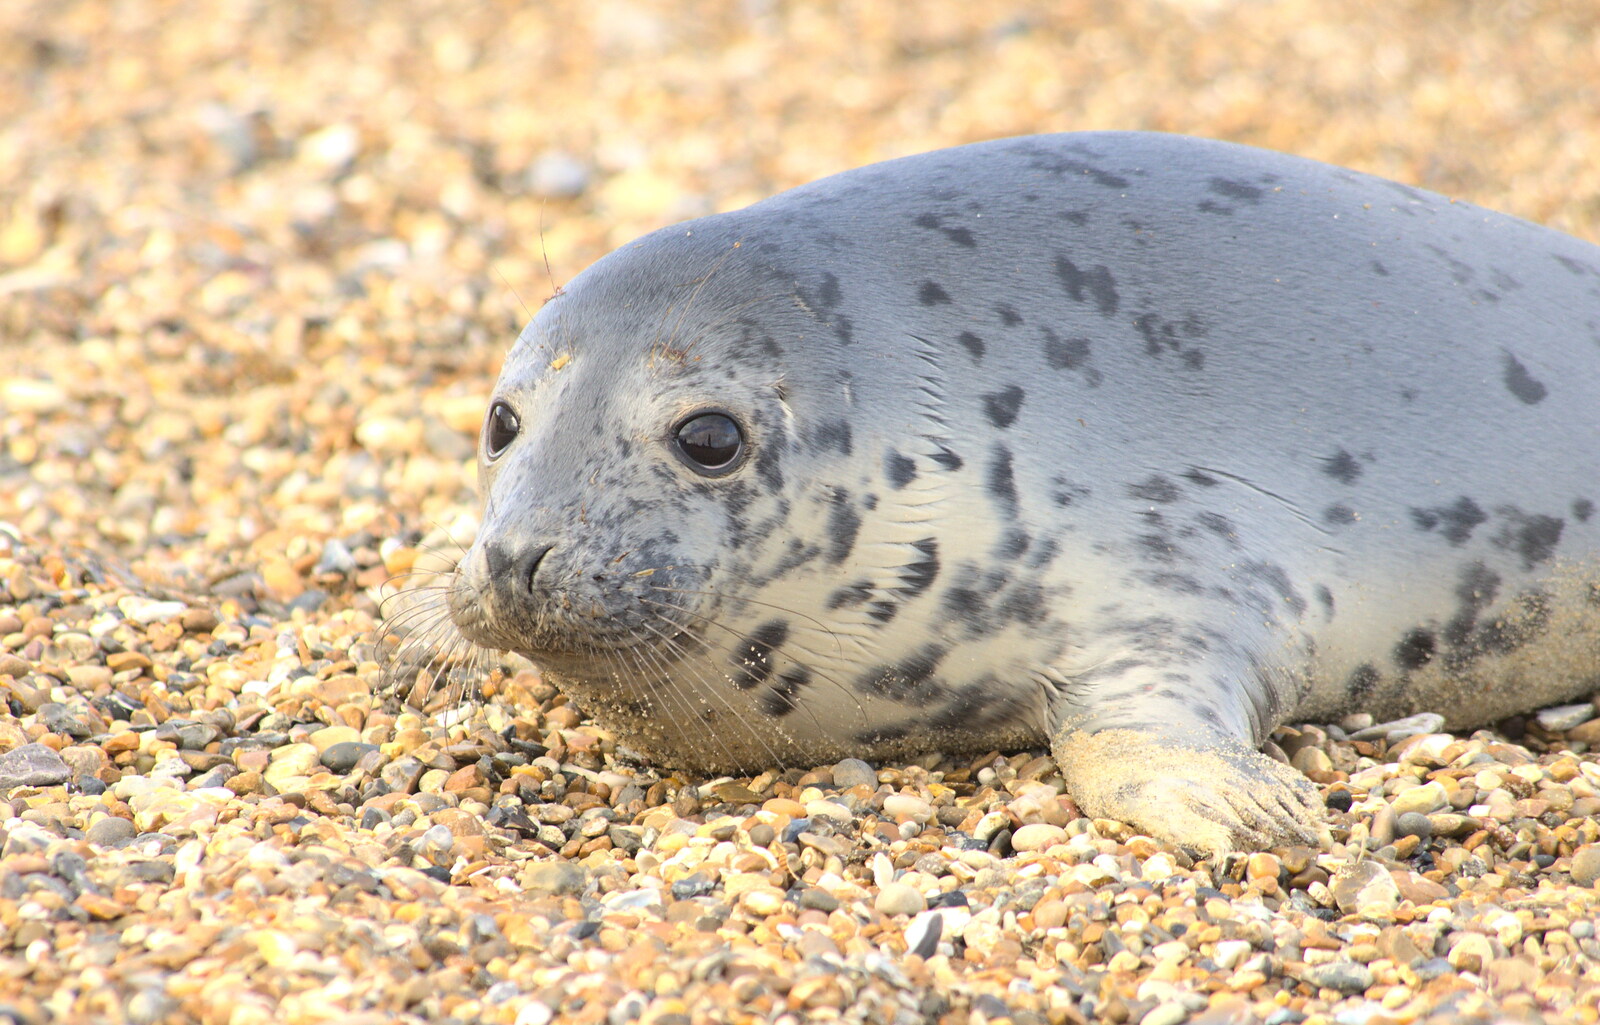 The seal pup comes up close from The Seals of Horsey Gap, Norfolk - 21st February 2016